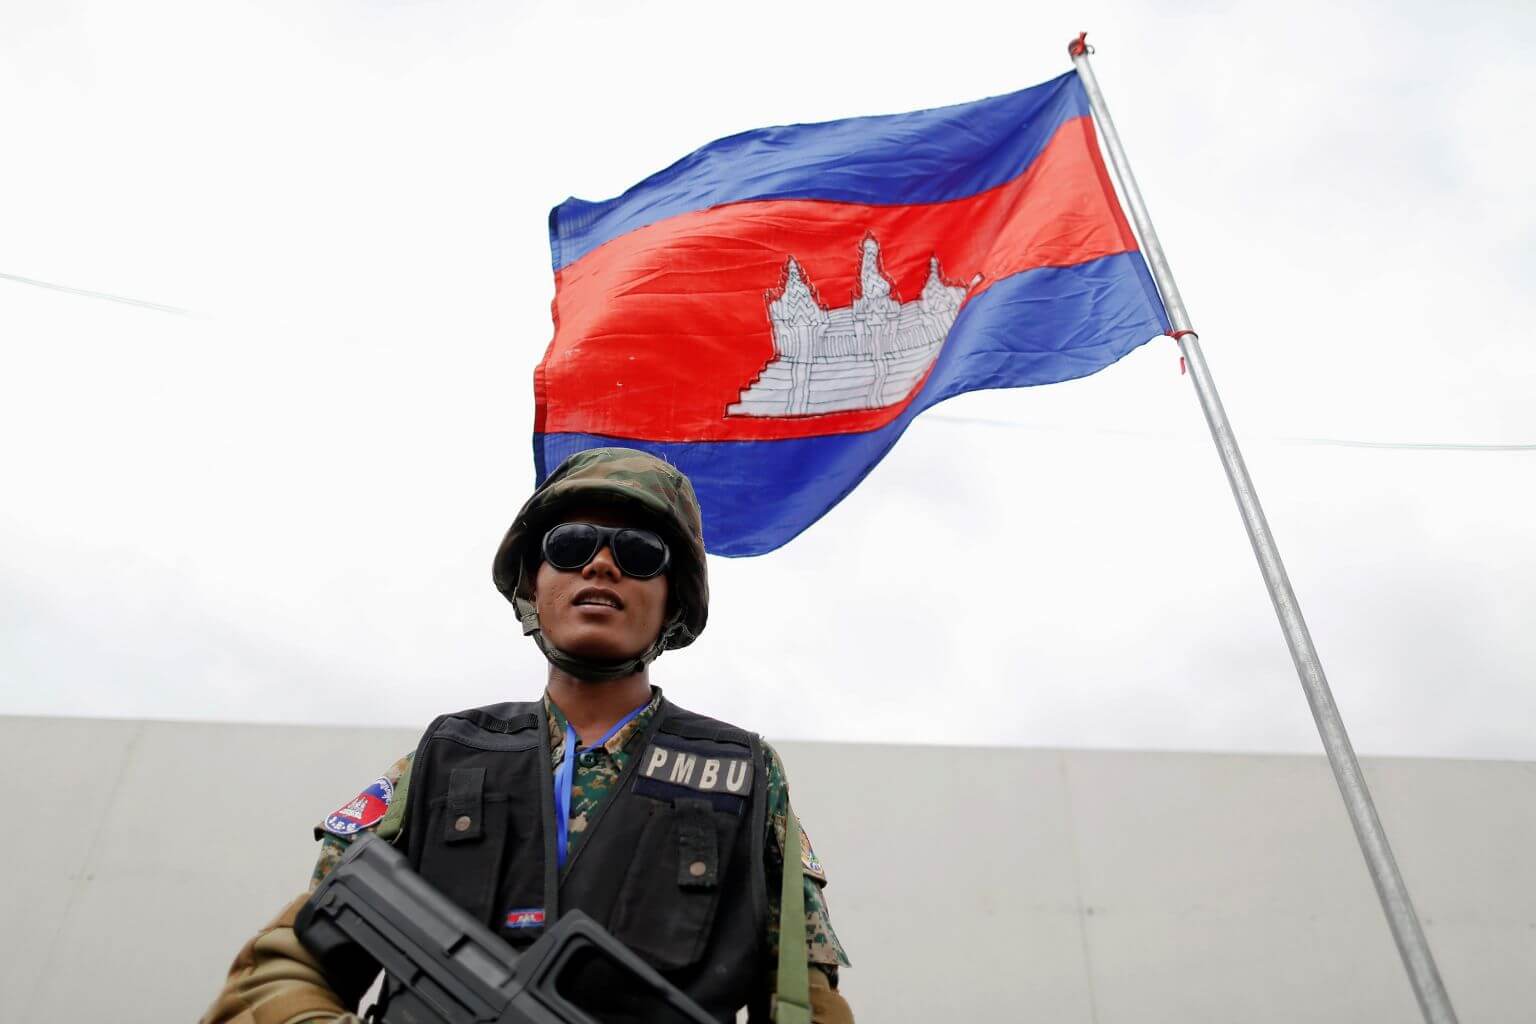 US Imposes Sanctions on Cambodia Over Human Rights Abuses, Ties With Chinese Military